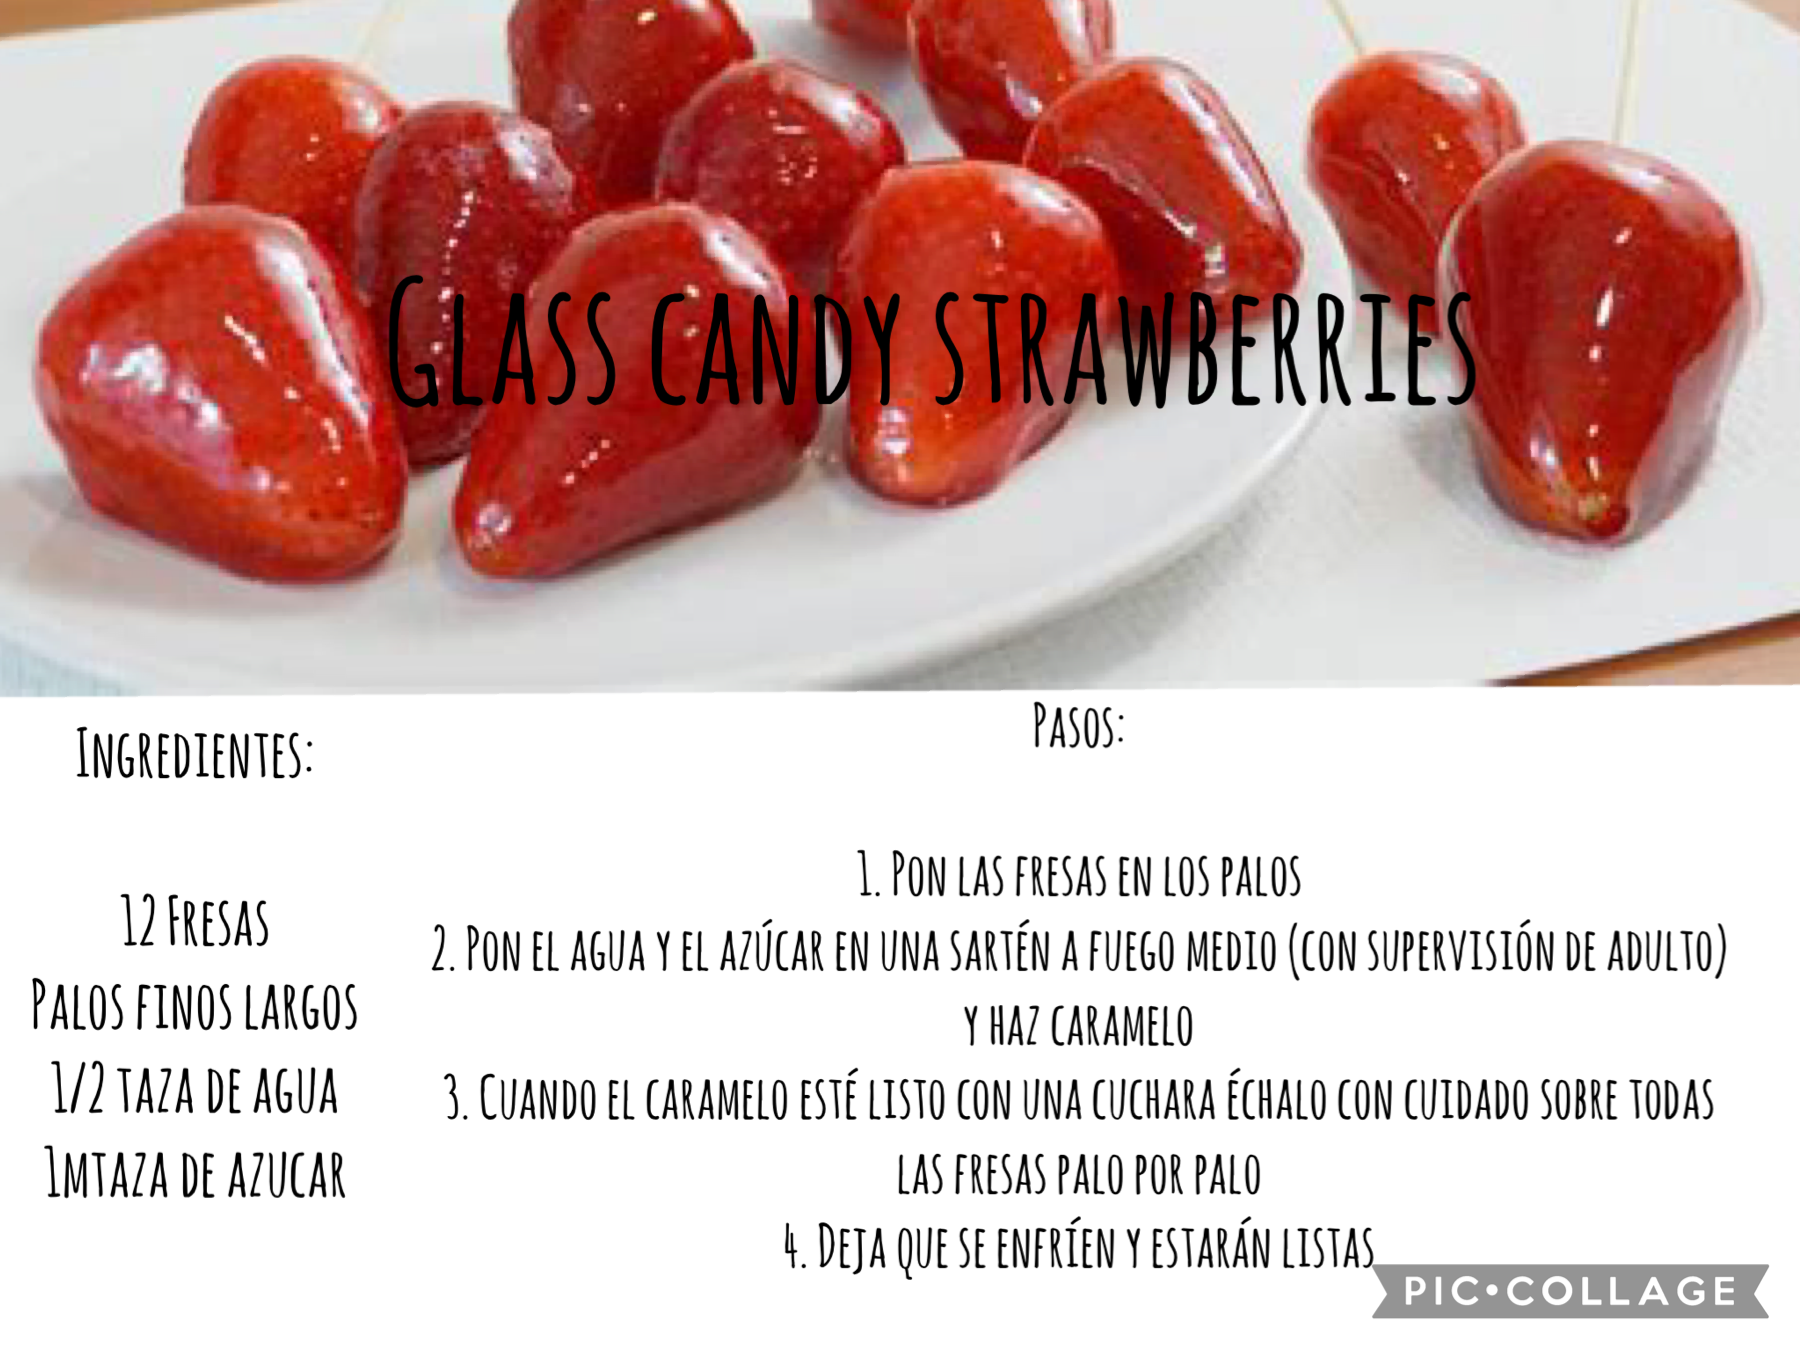 Glass candy strawberries 